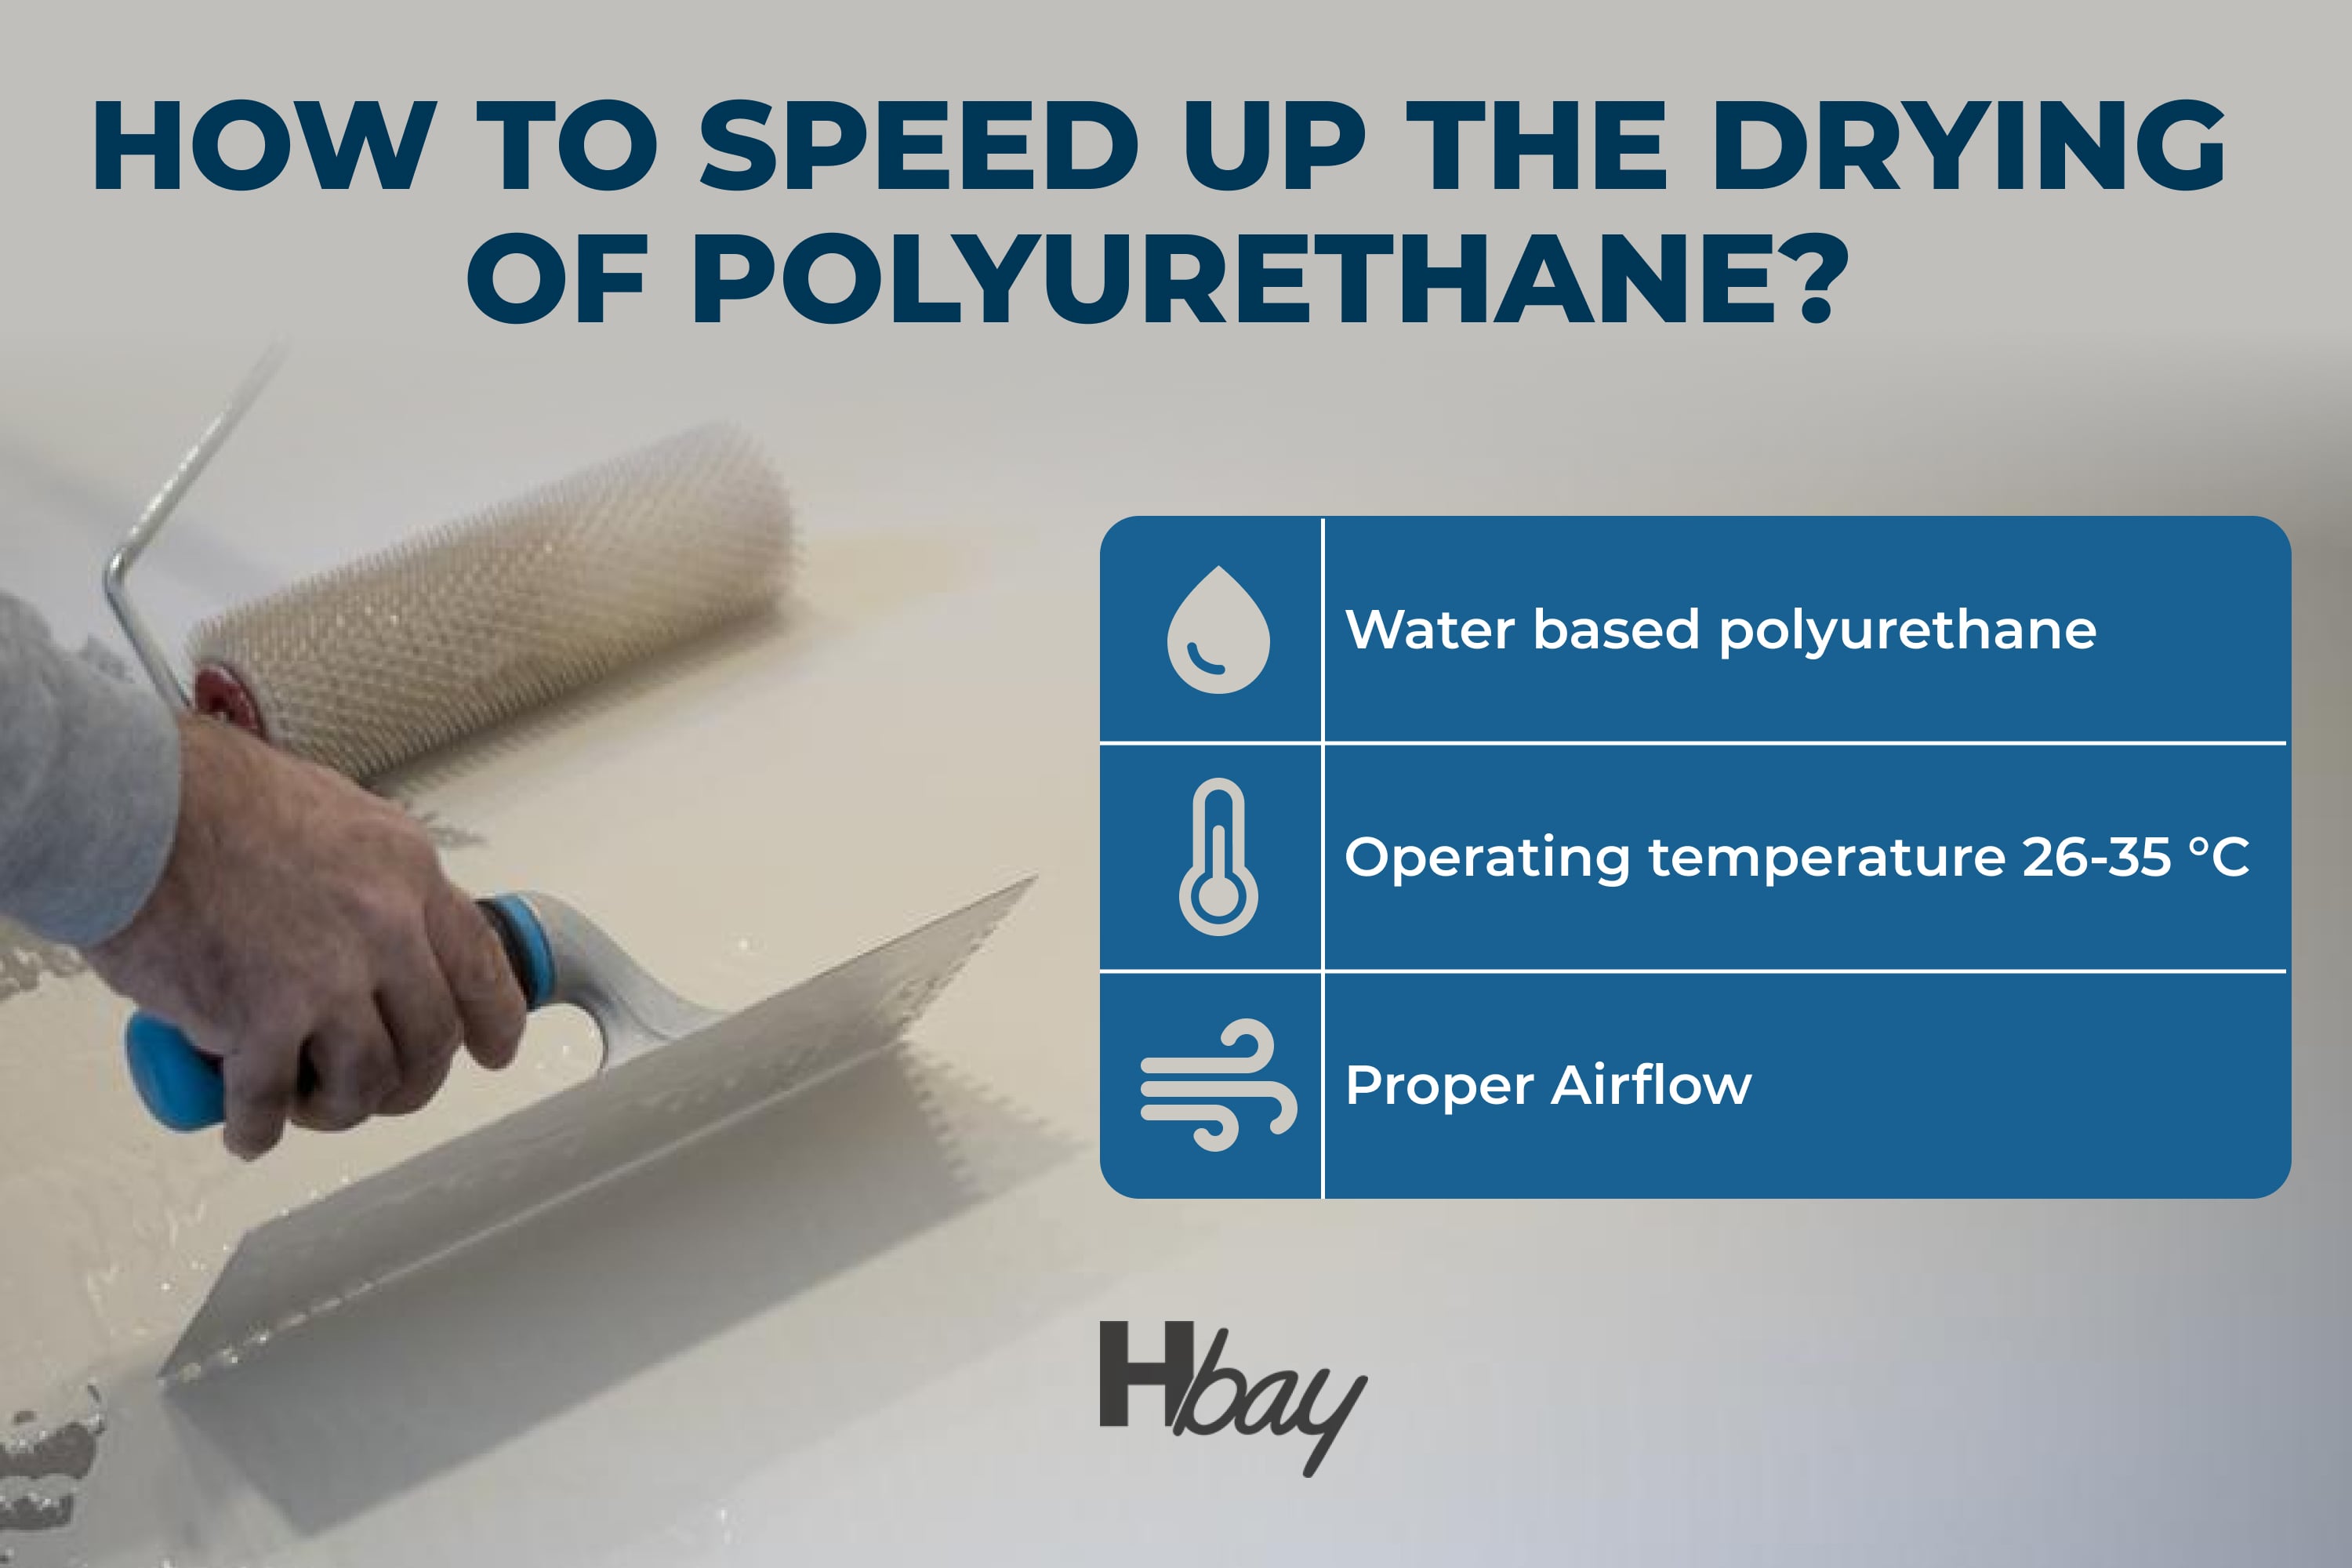 How to speed up the drying of polyurethane